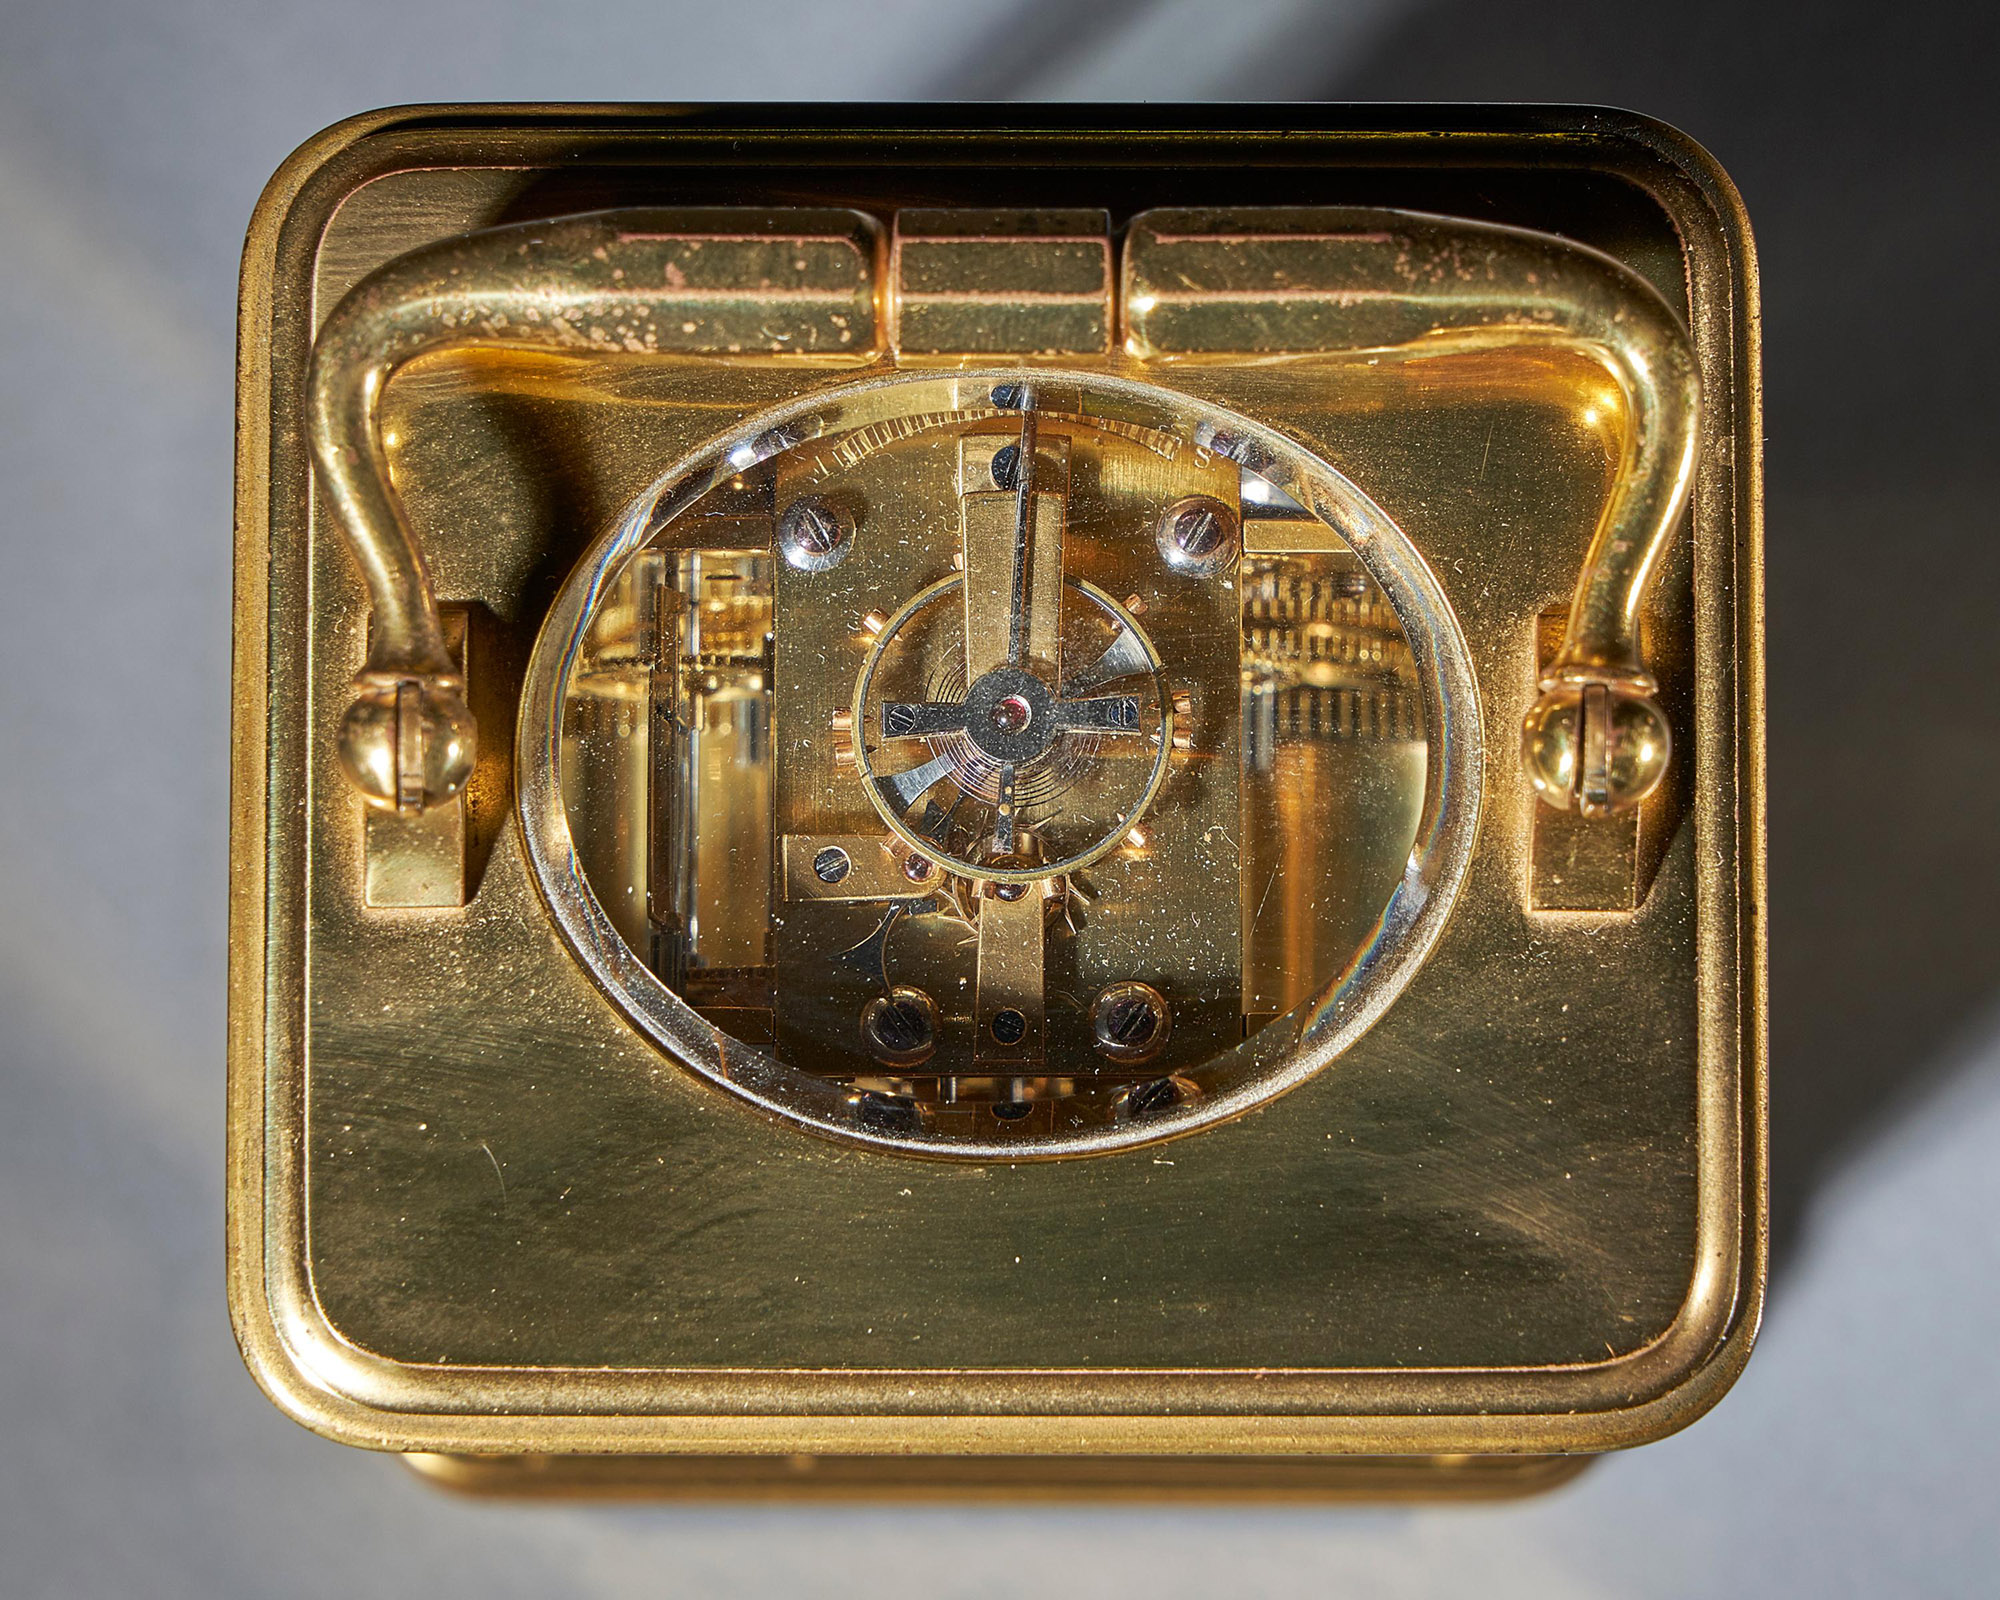 Striking 19th Century Carriage Clock with a Gilt-Brass Corniche Case by Grohé 8